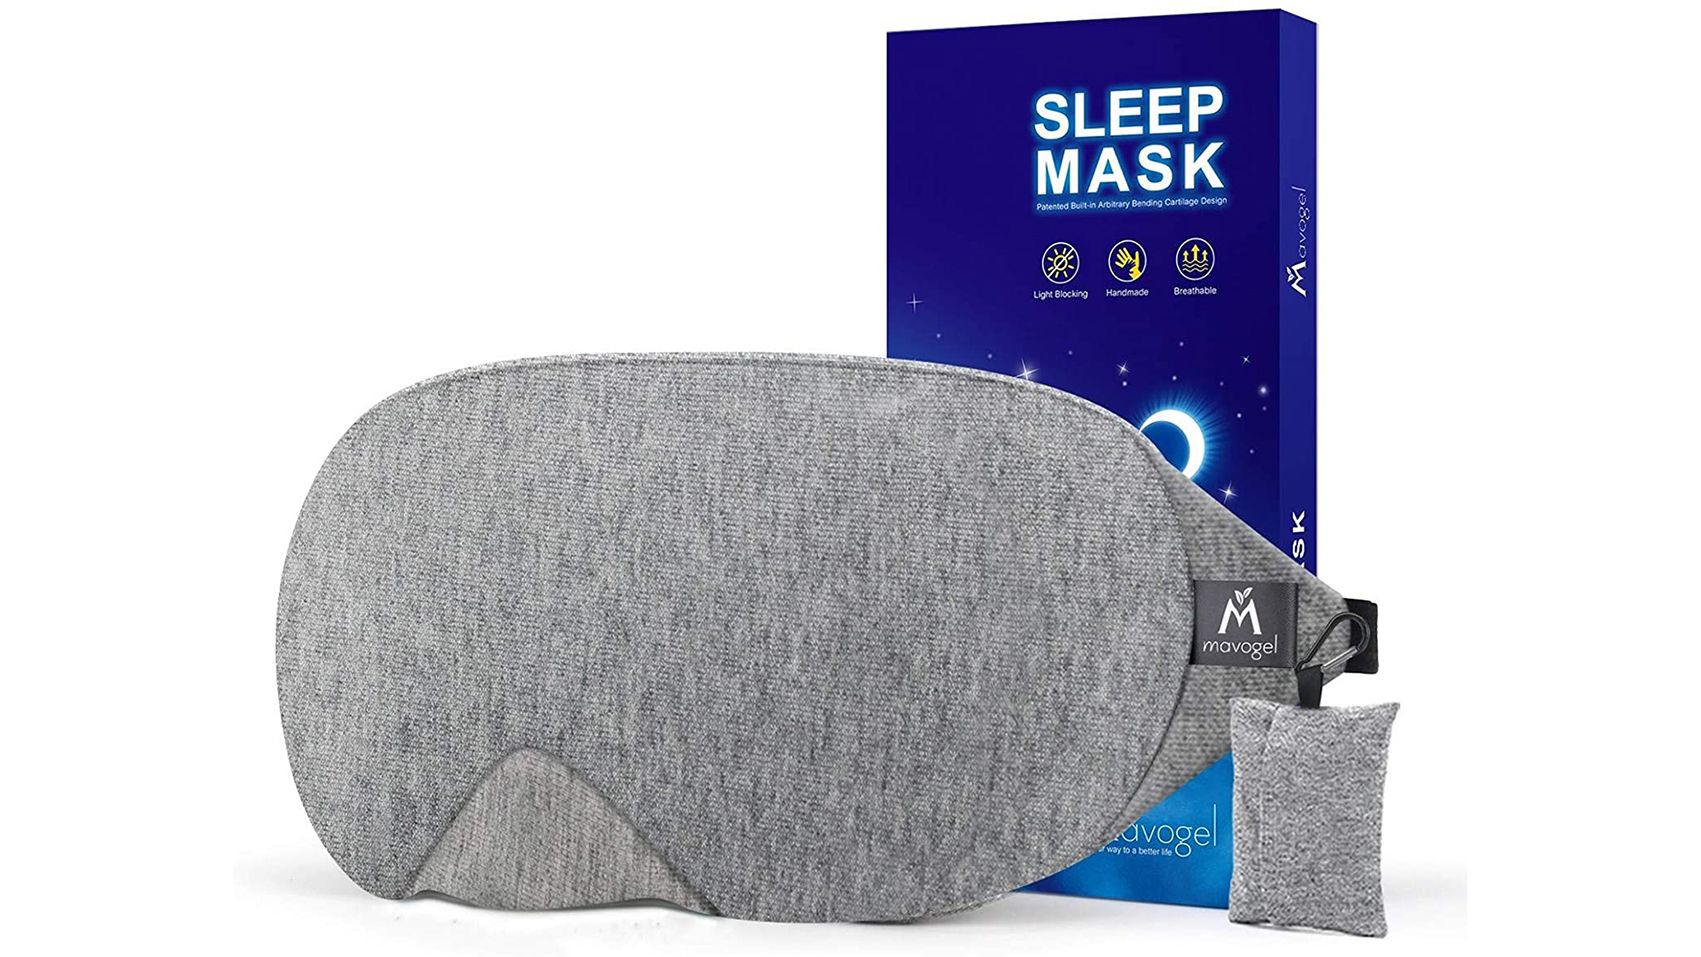 Track Your Sleep in a Whole New Way With Somalytics' Sleep Mask - CNET